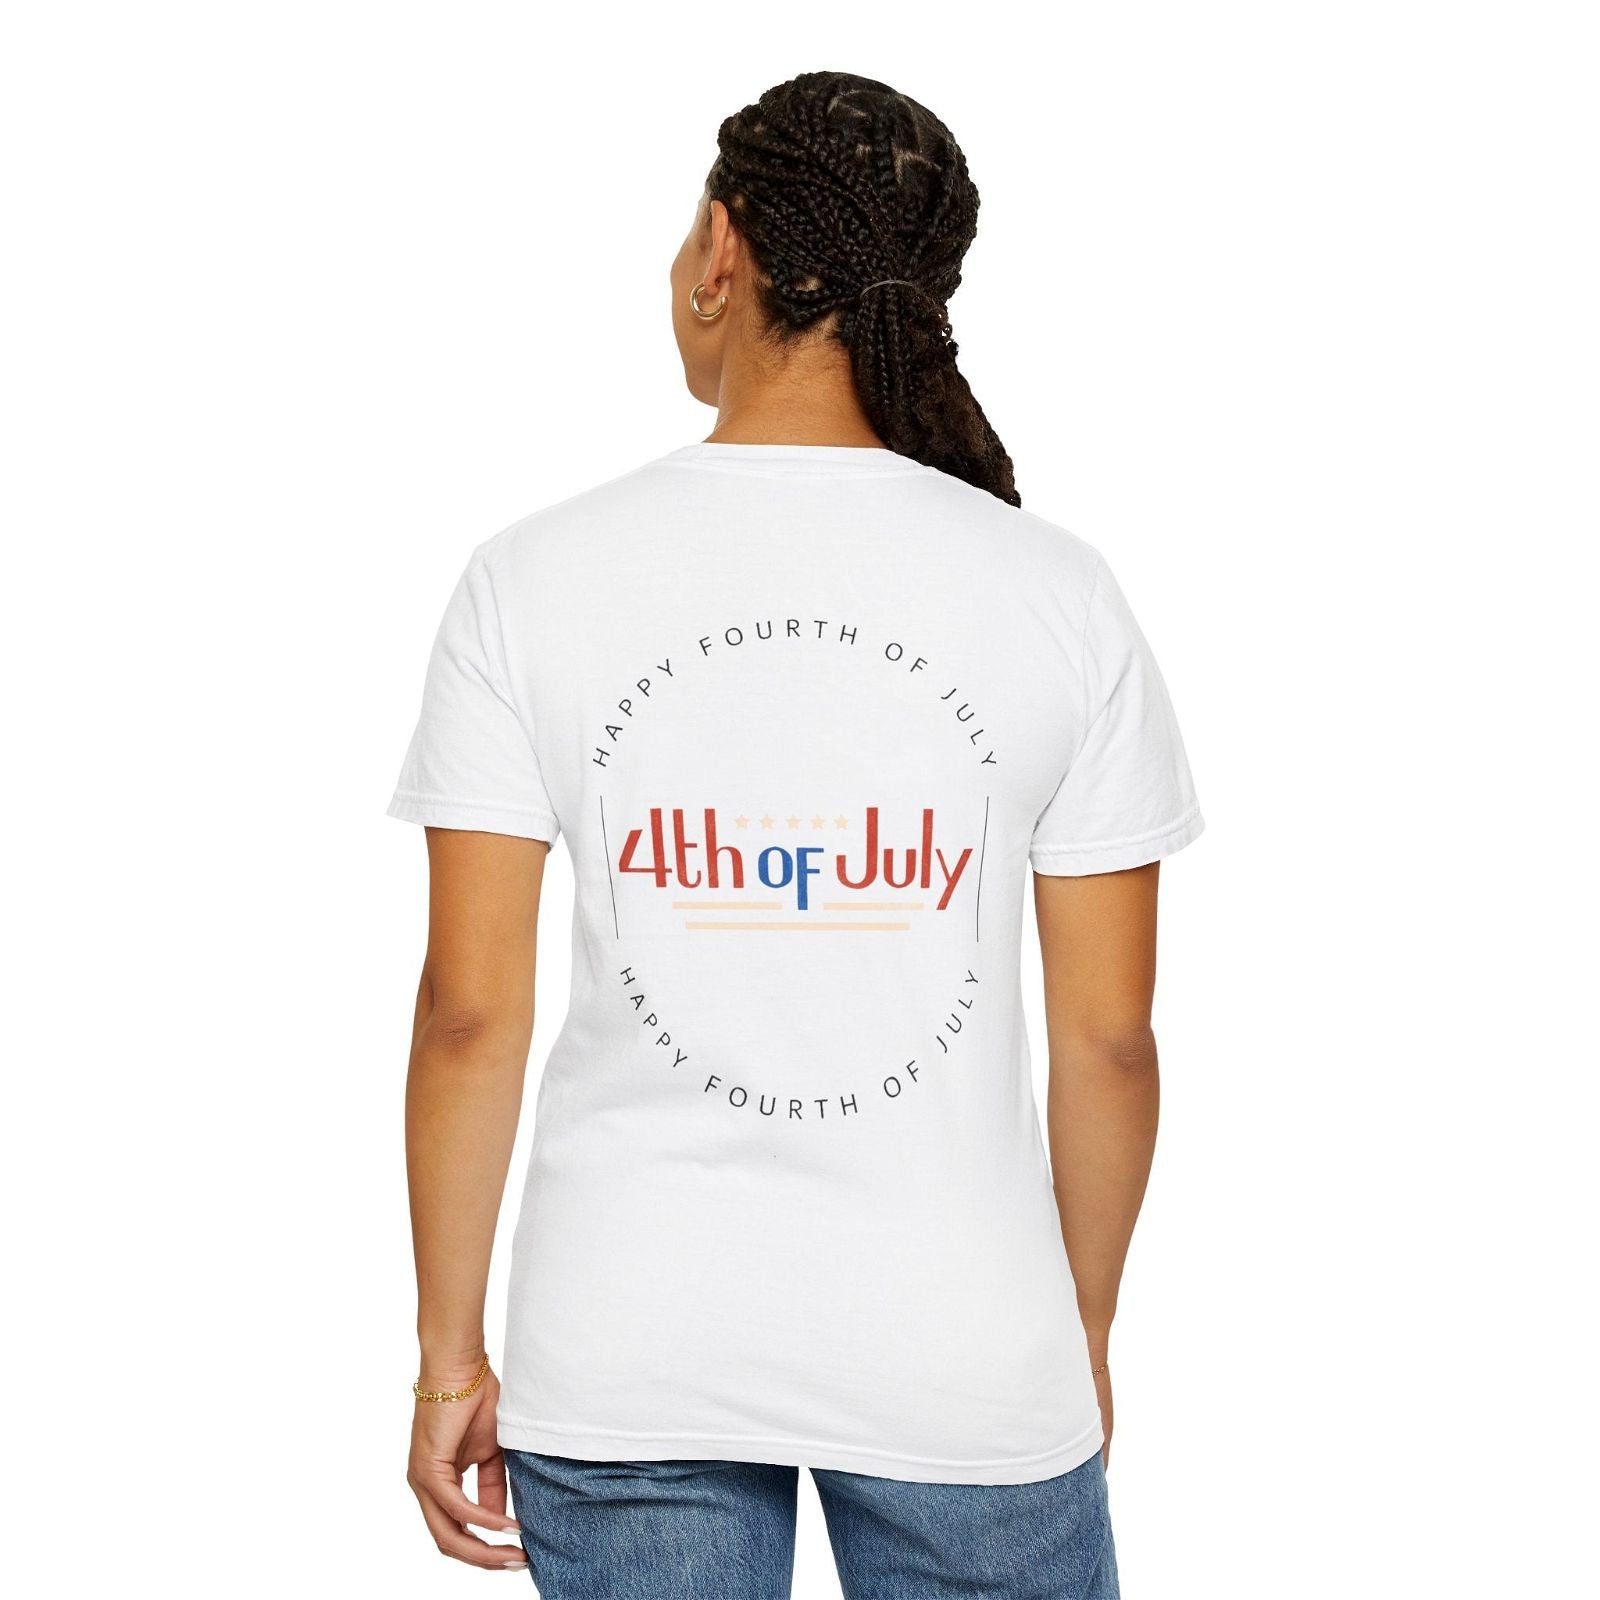 4th of July t - shirt - Independence Day - Unisex - Alex's Store - White - 